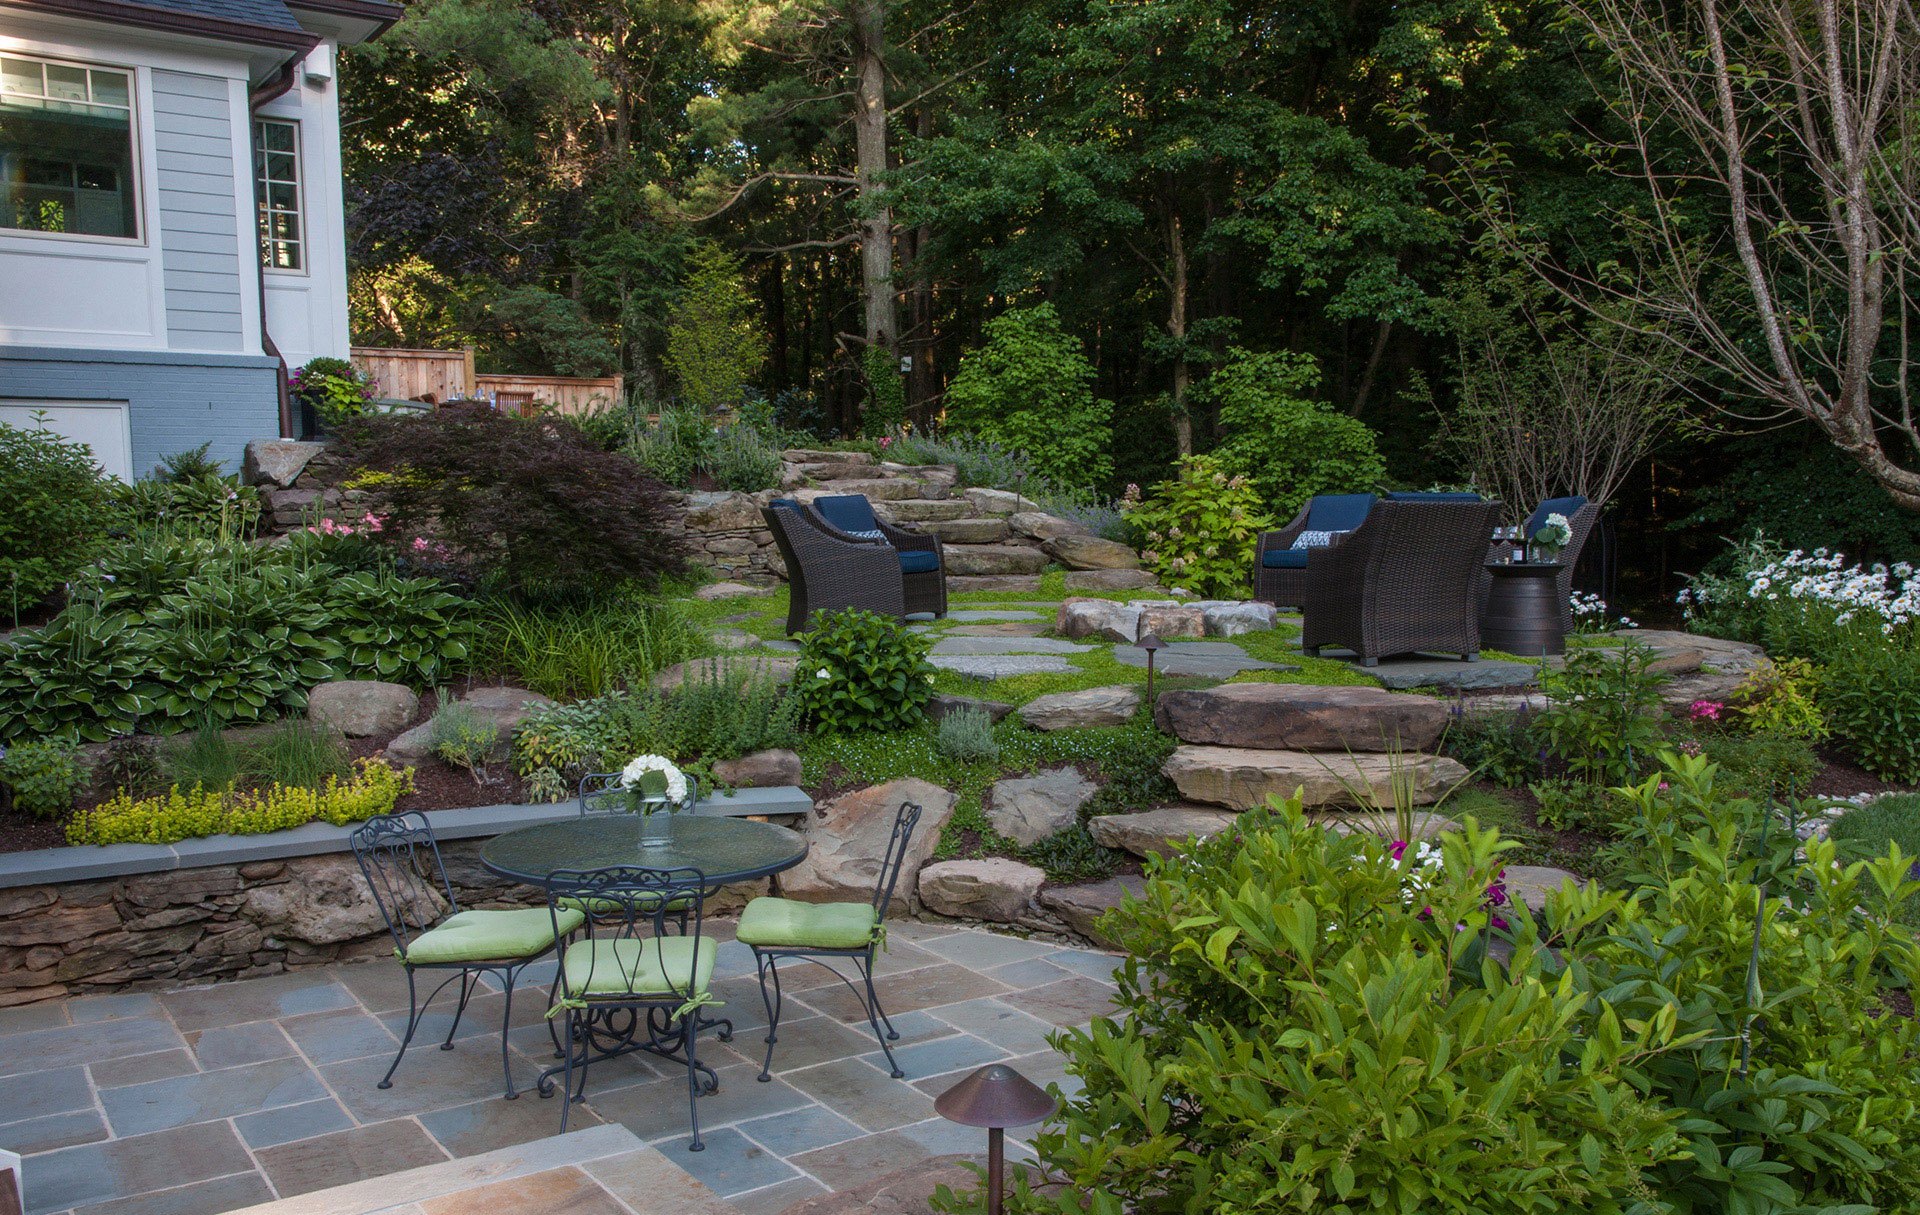 Tile Path in Backyard with outdoor furniture and fireplace